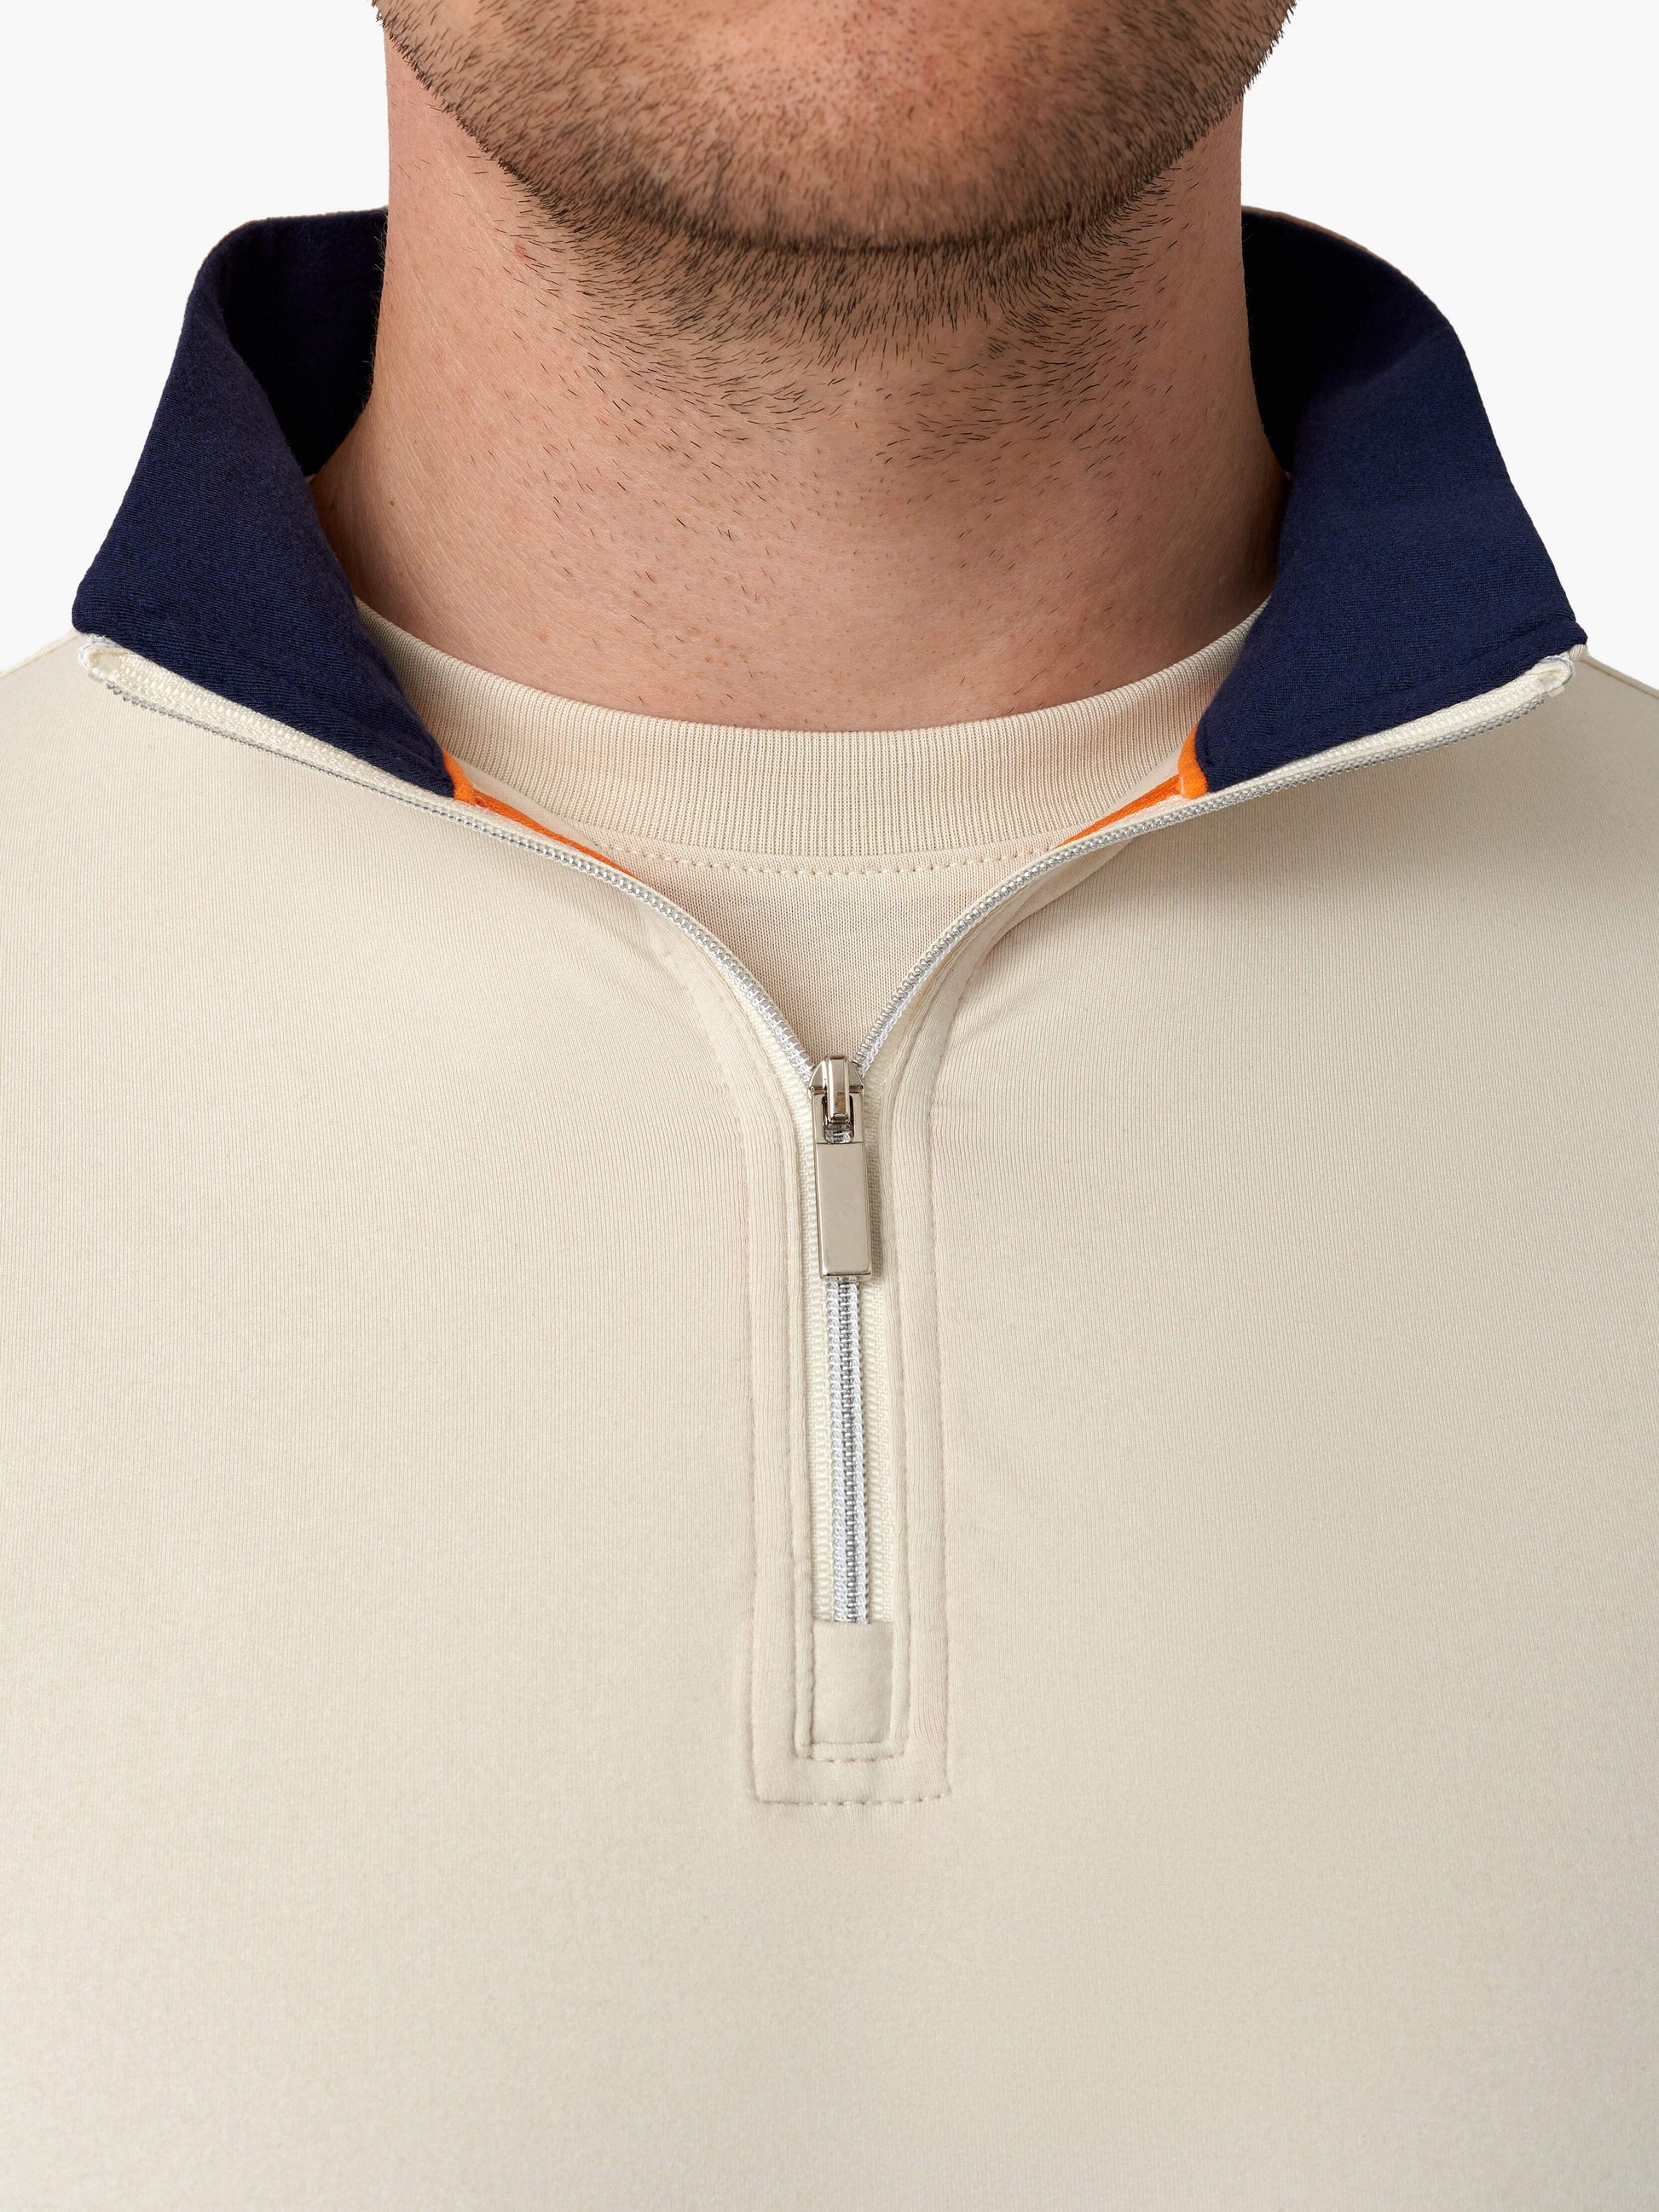 Sand Stone Q-zip for Golf